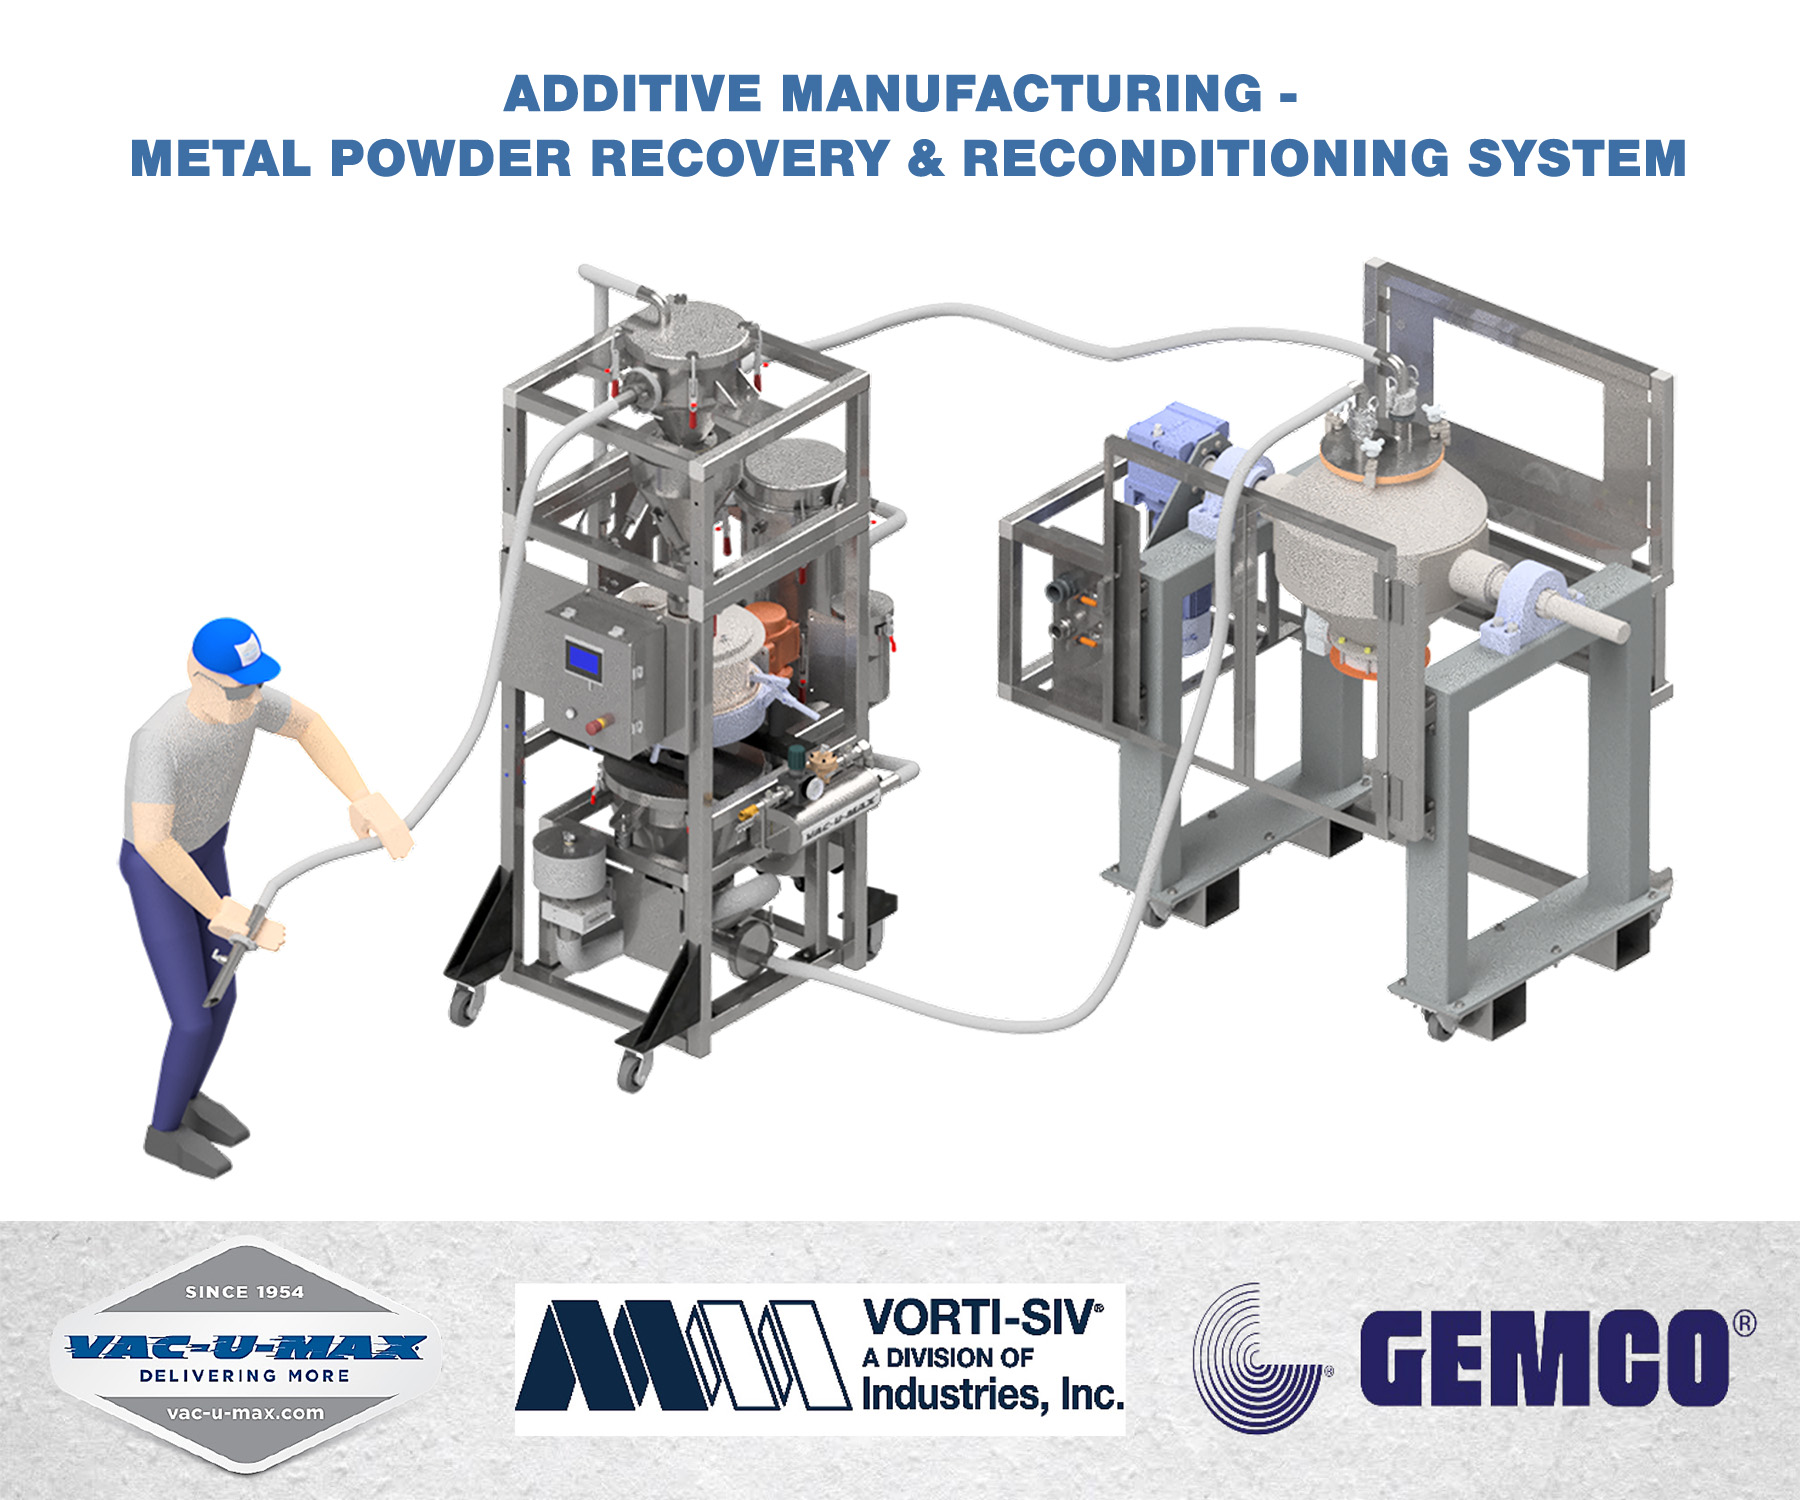 Metal Powder Recovery & Reconditioning System